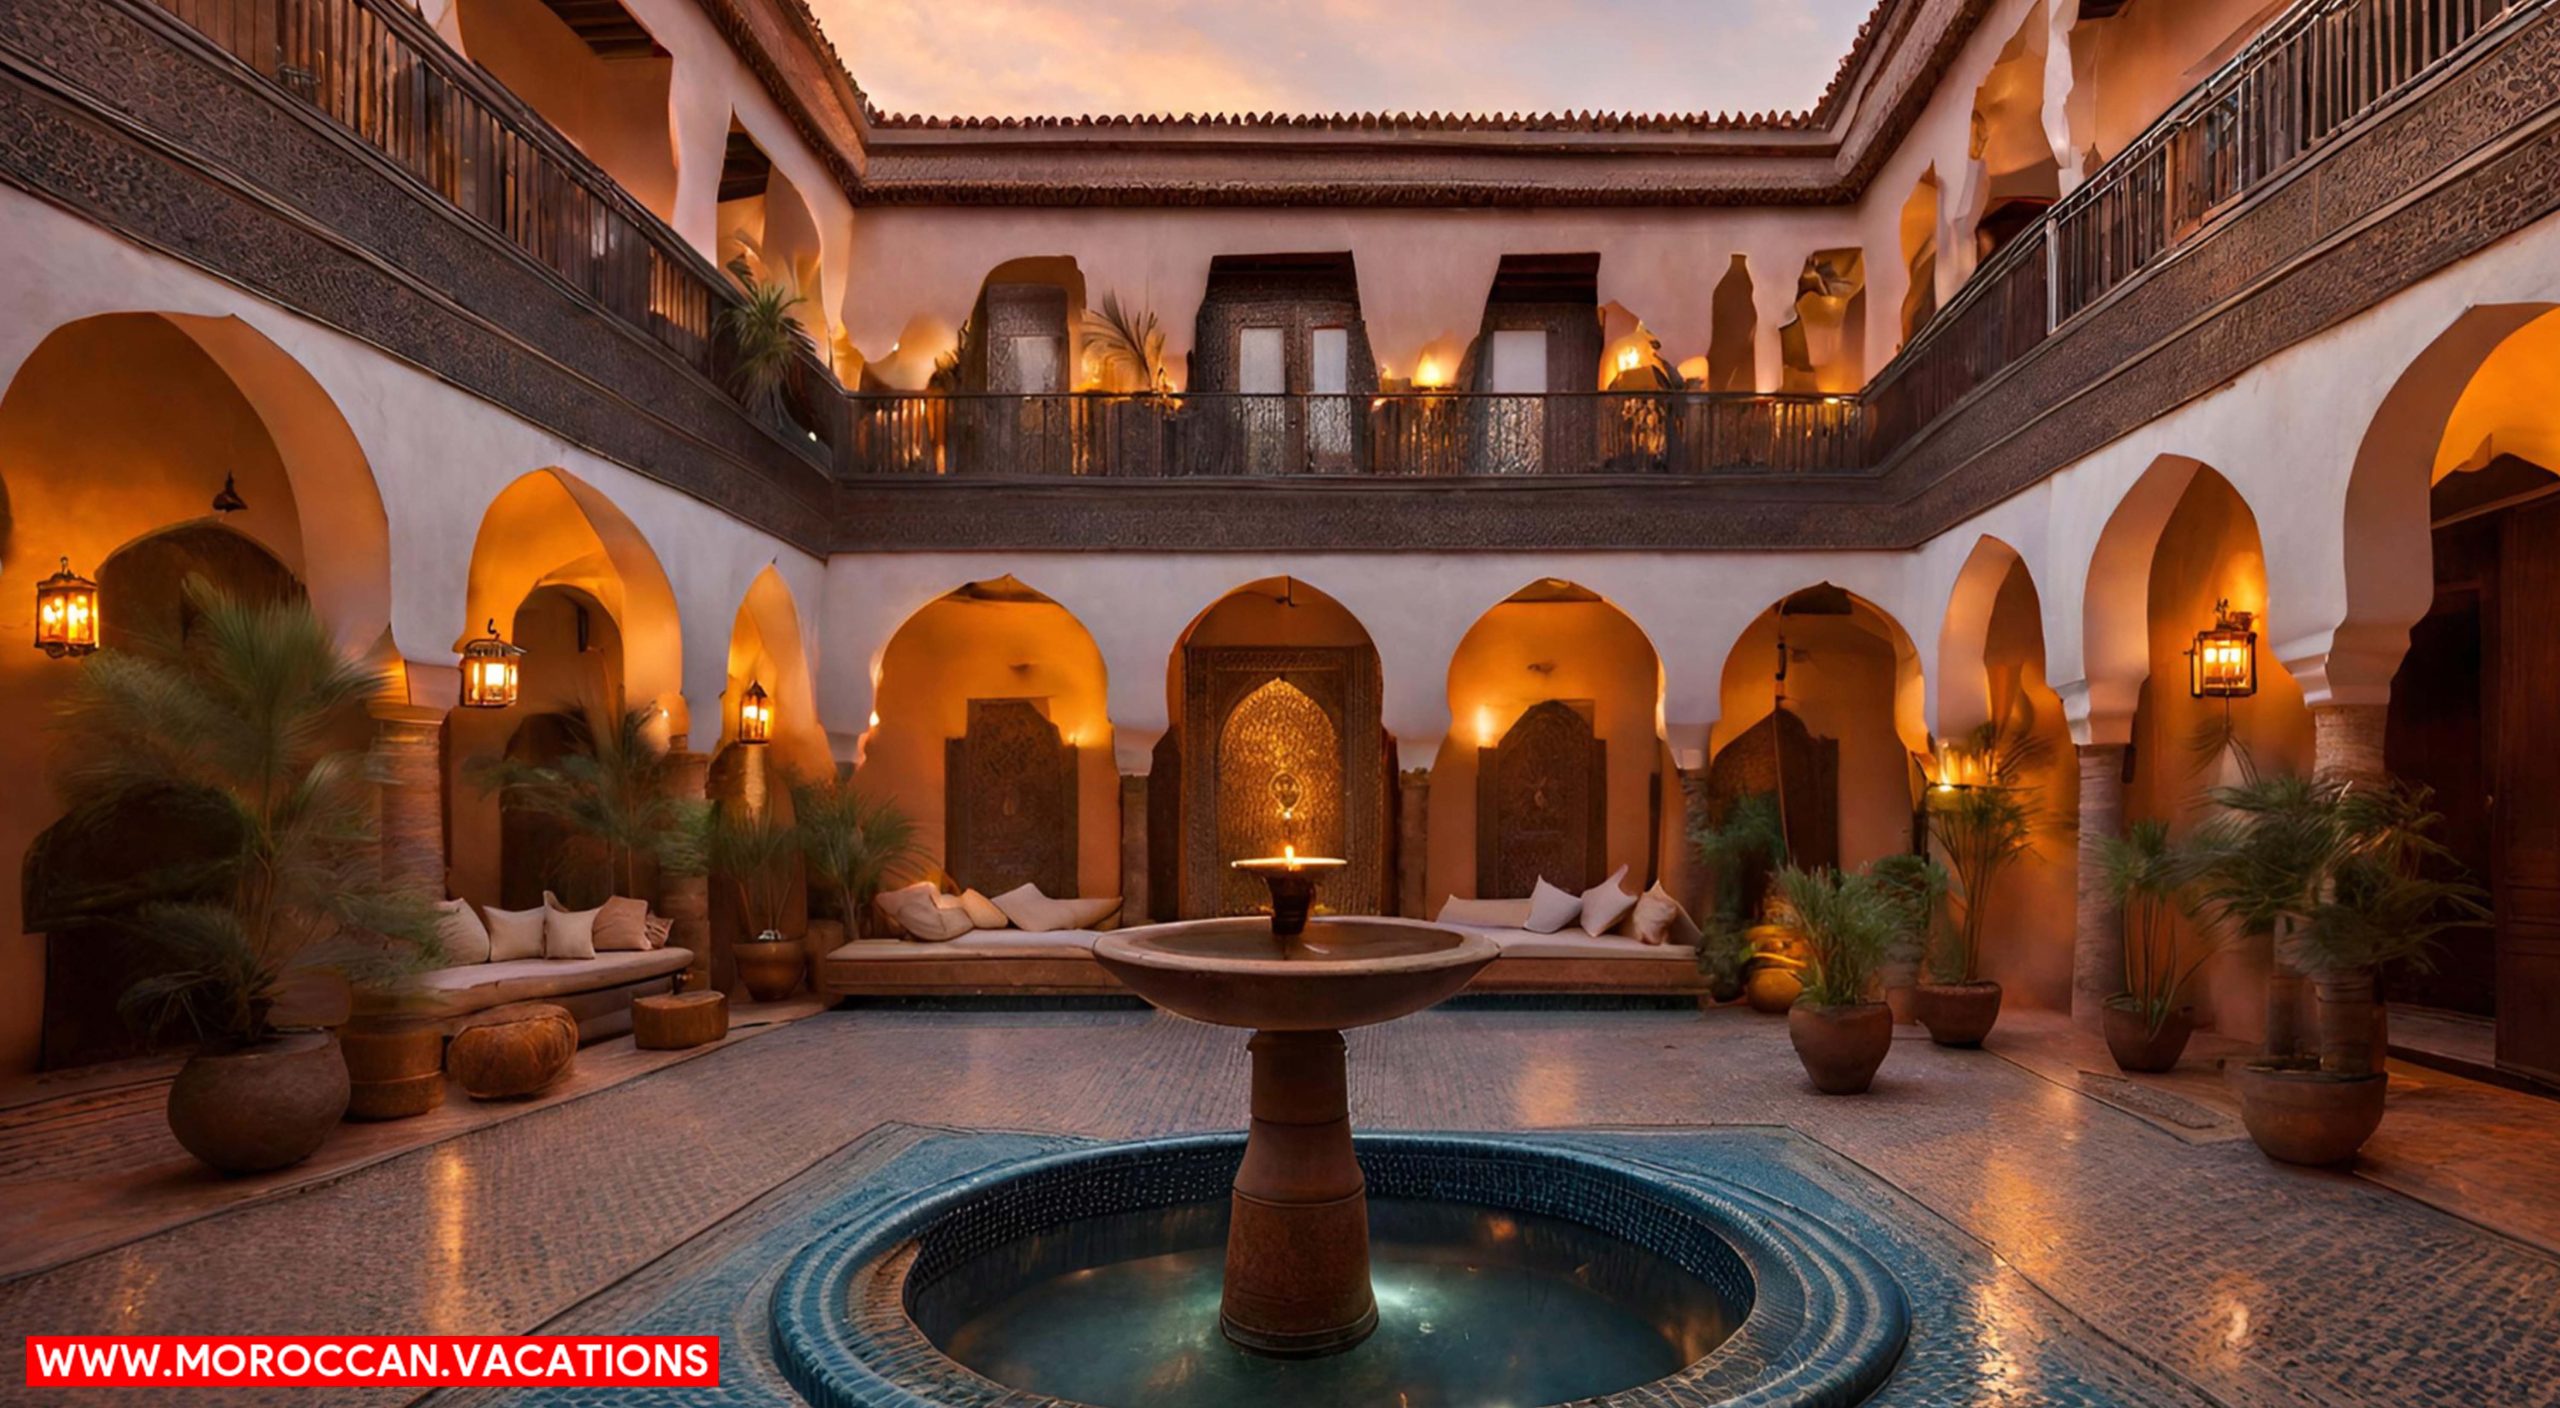 An opulent courtyard of a Marrakech Riad at sunset, filled with traditional Moroccan decor.